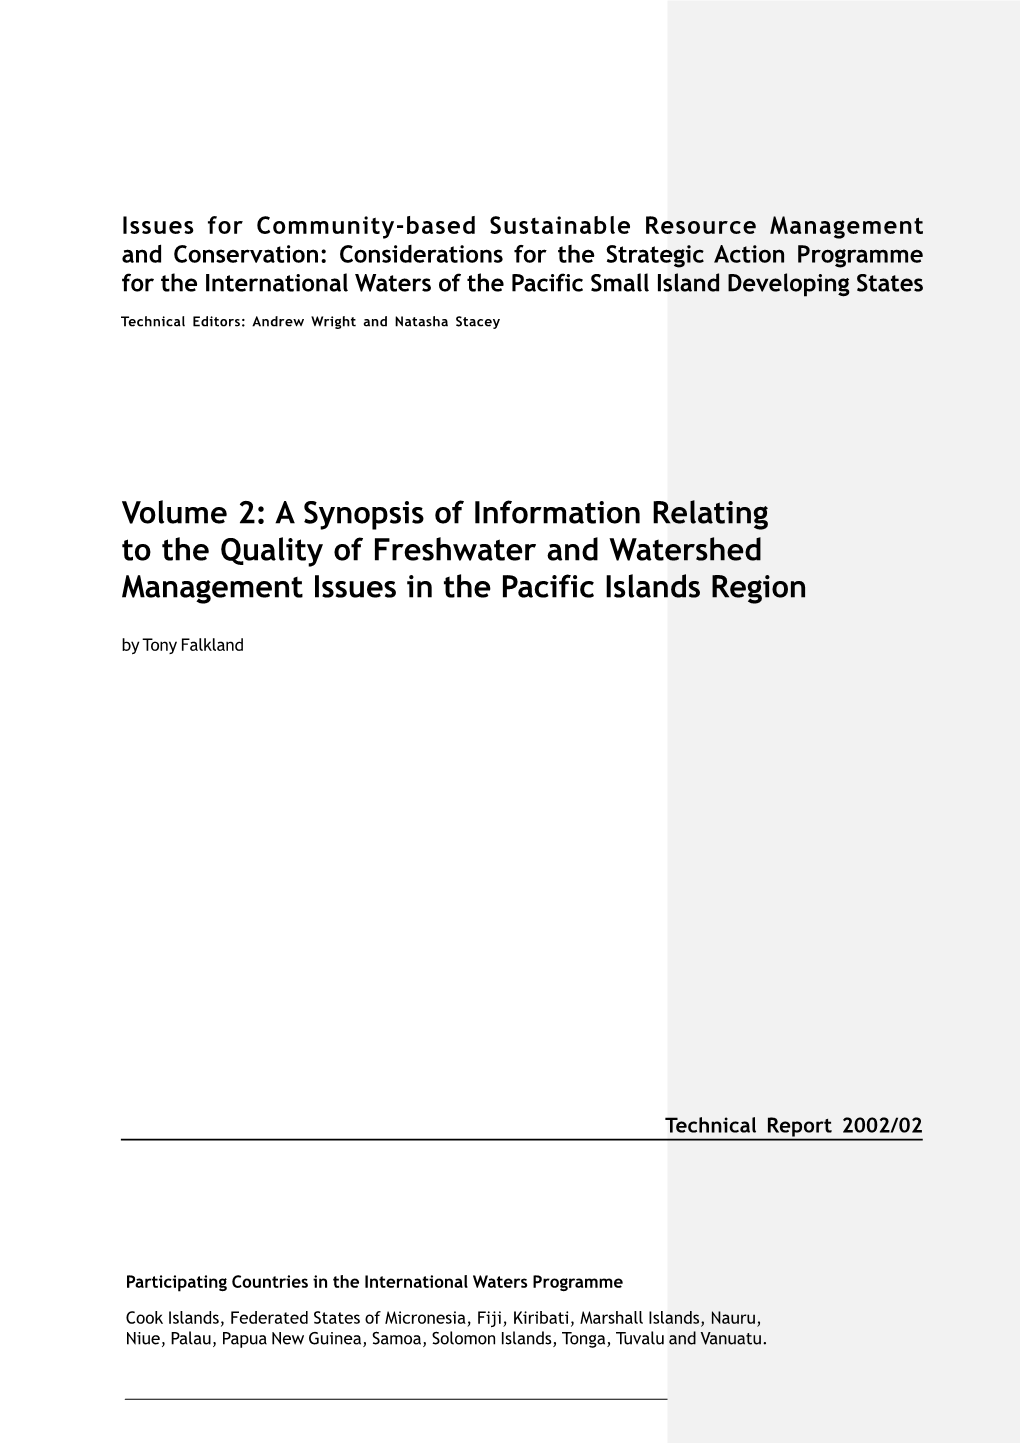 Volume 2: a Synopsis of Information Relating to the Quality of Freshwater and Watershed Management Issues in the Pacific Islands Region by Tony Falkland